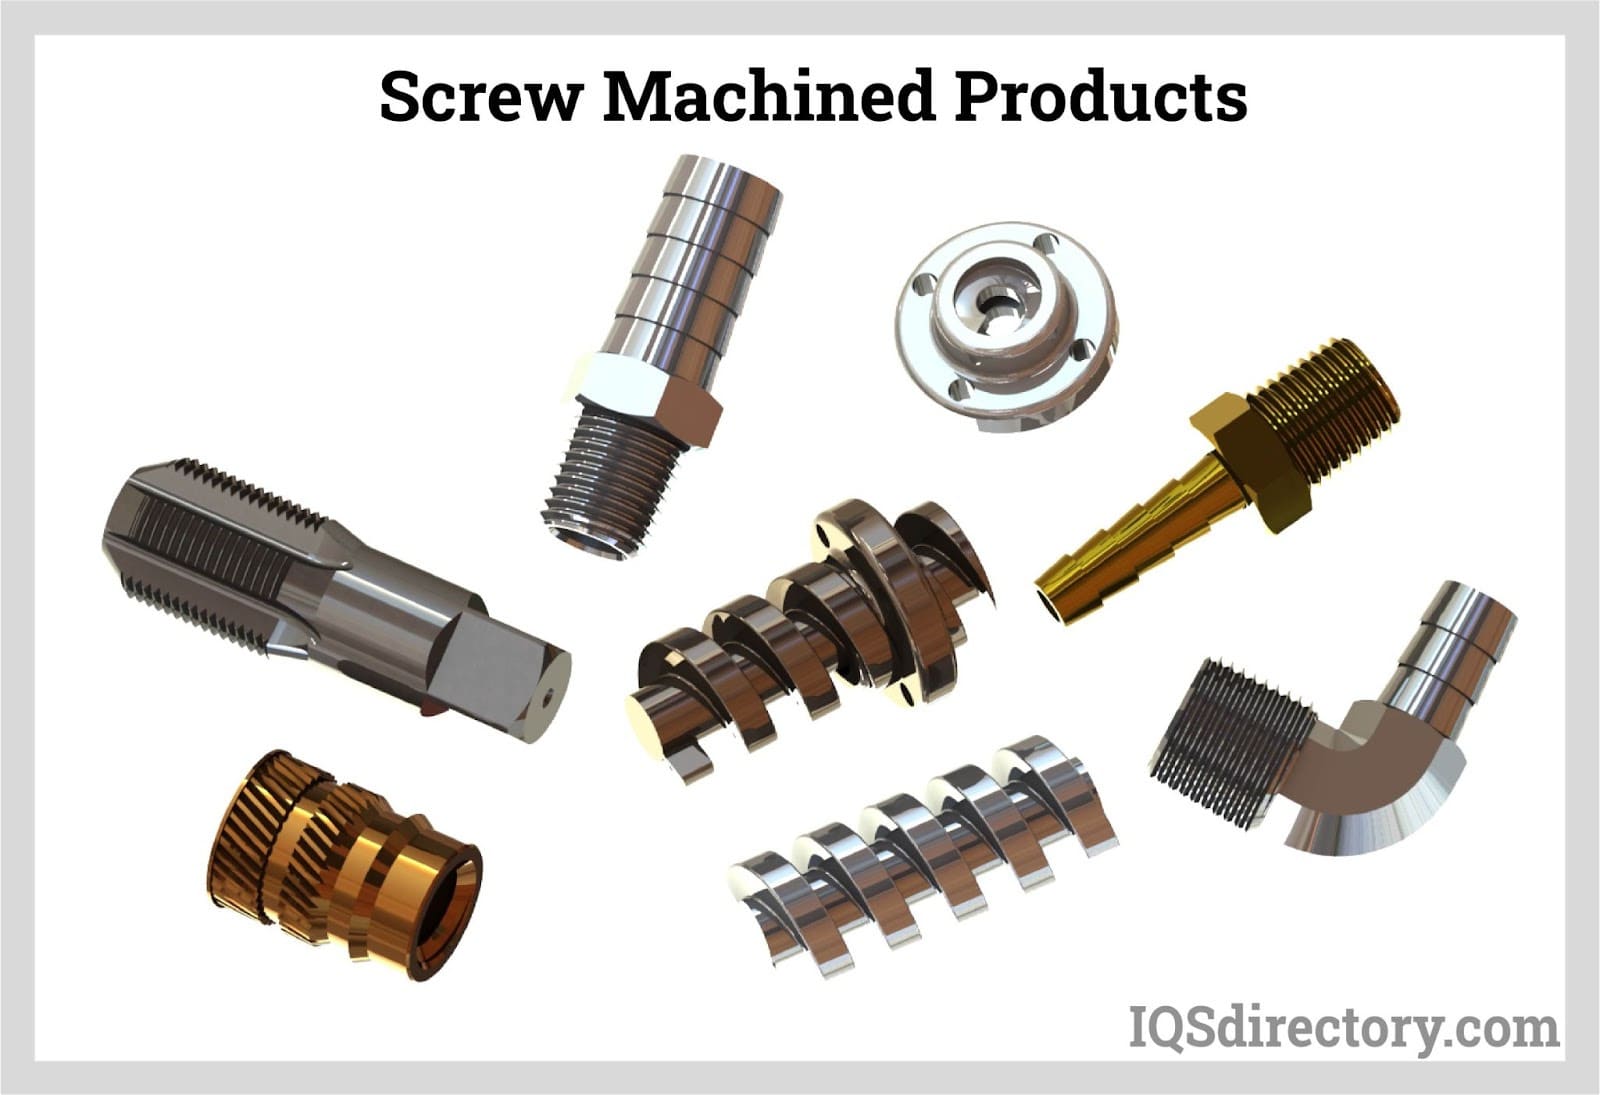 Screw Machined Parts and Products